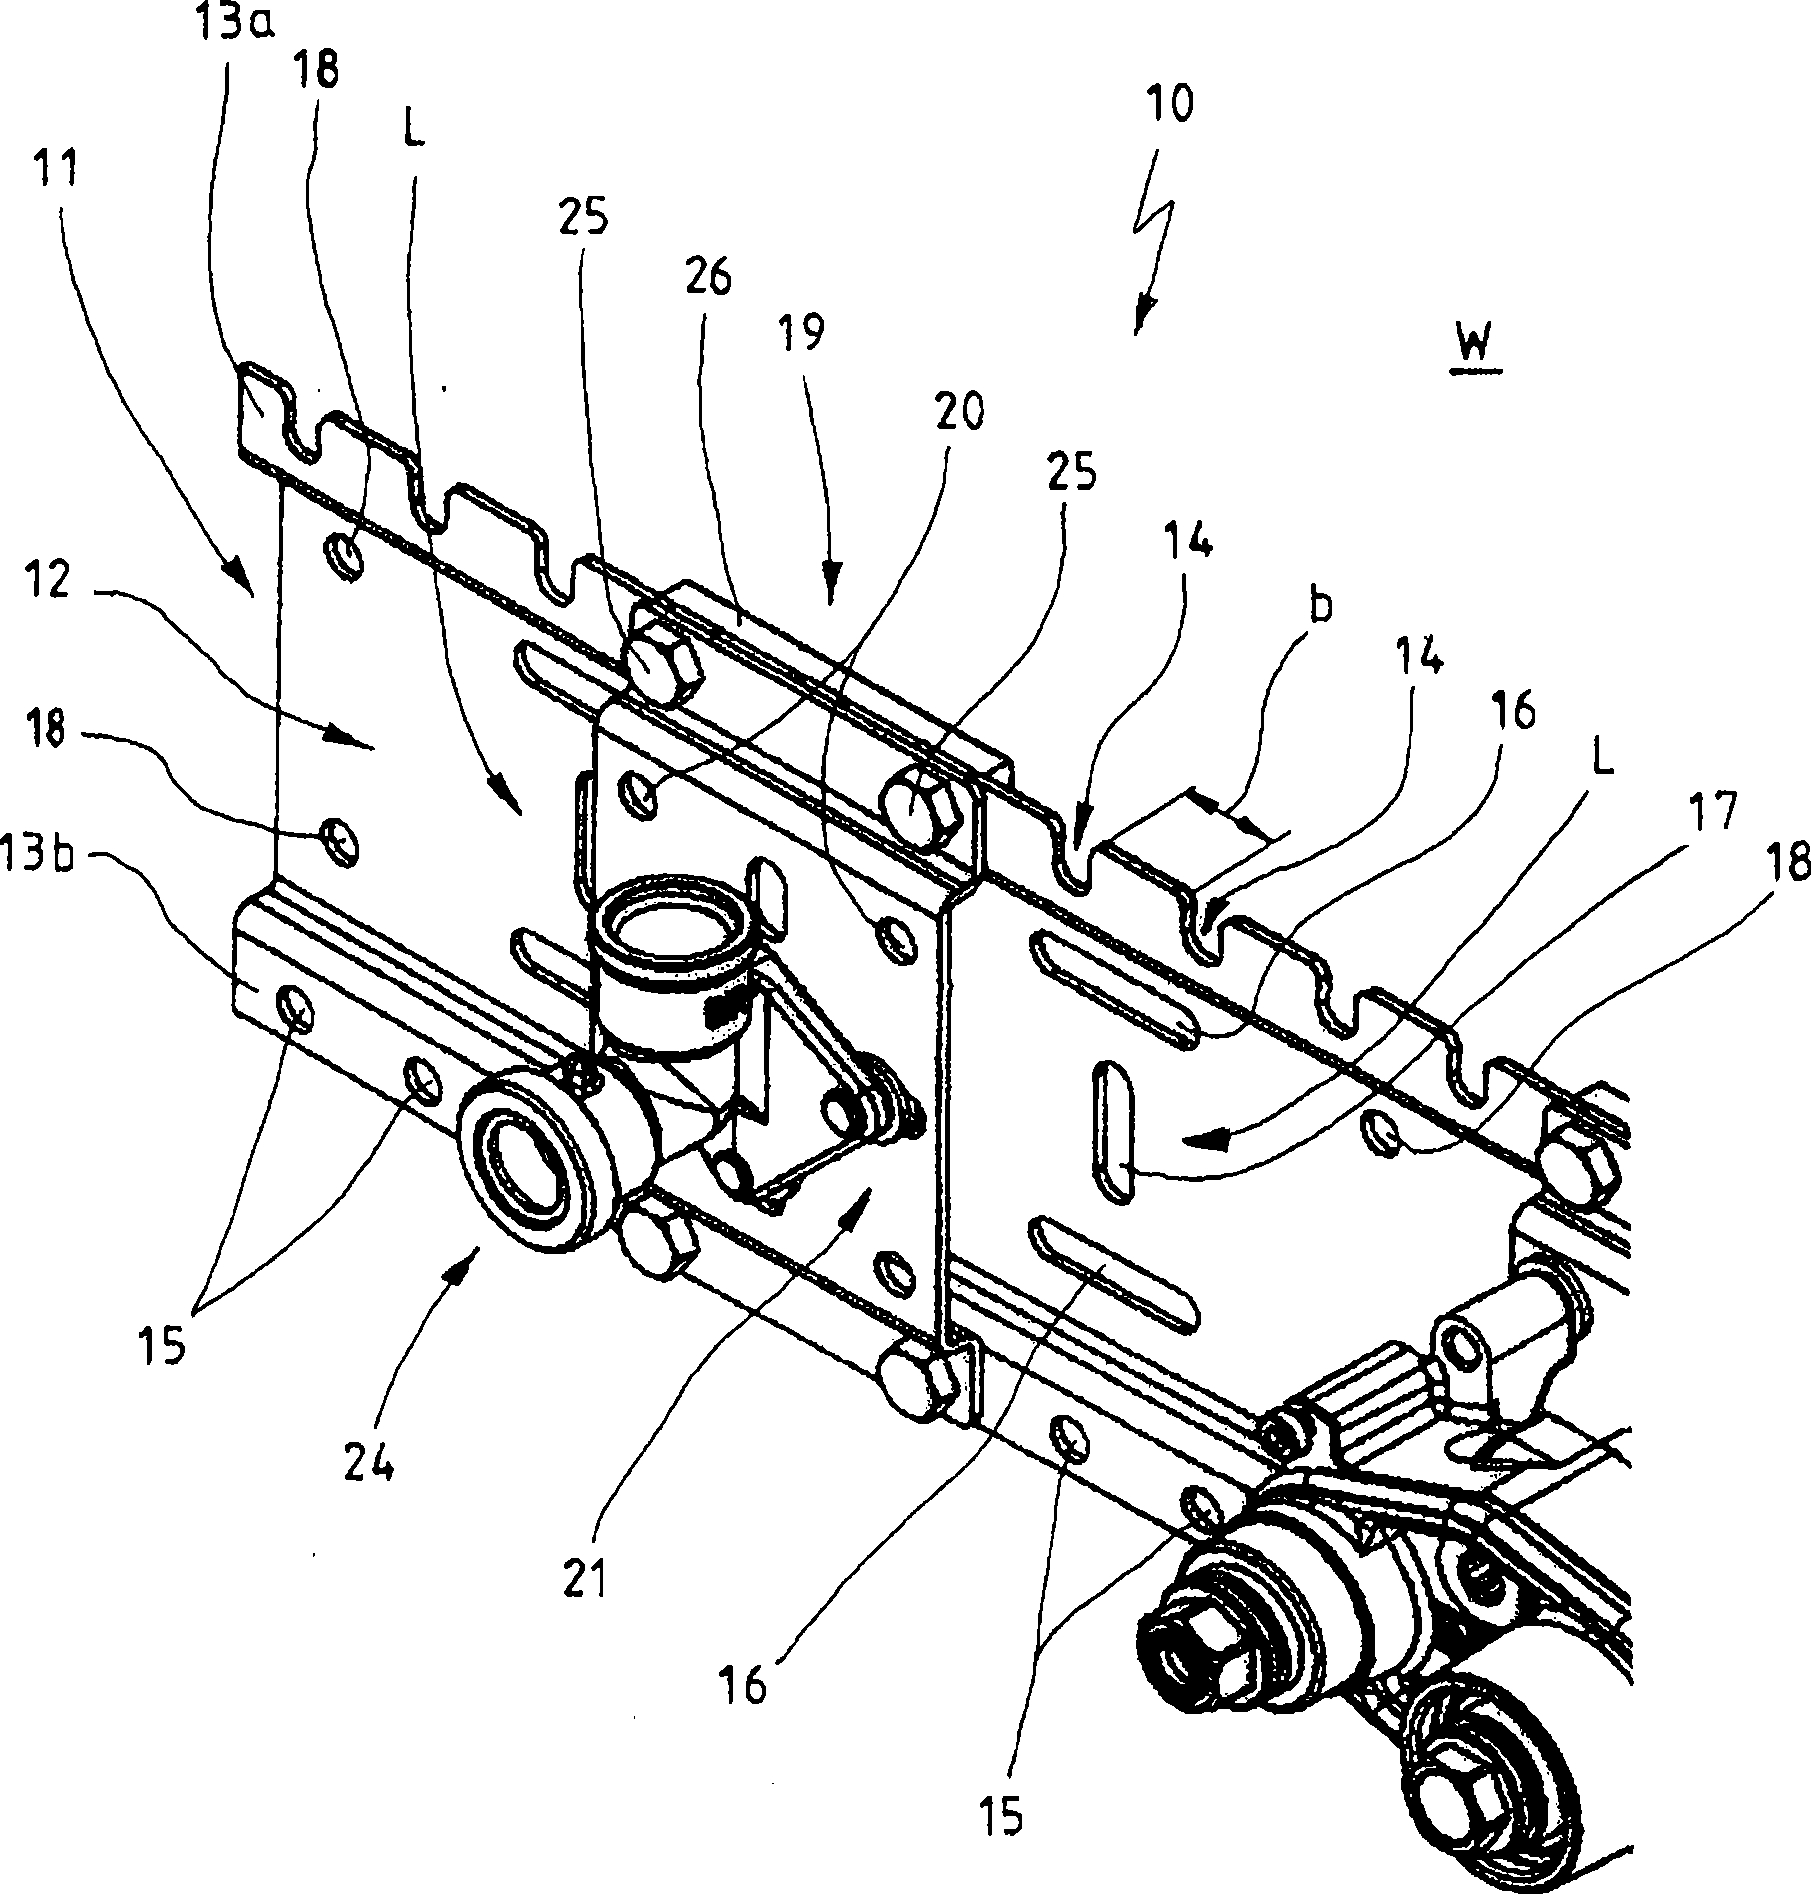 Device for fixing built-in sanitary elements